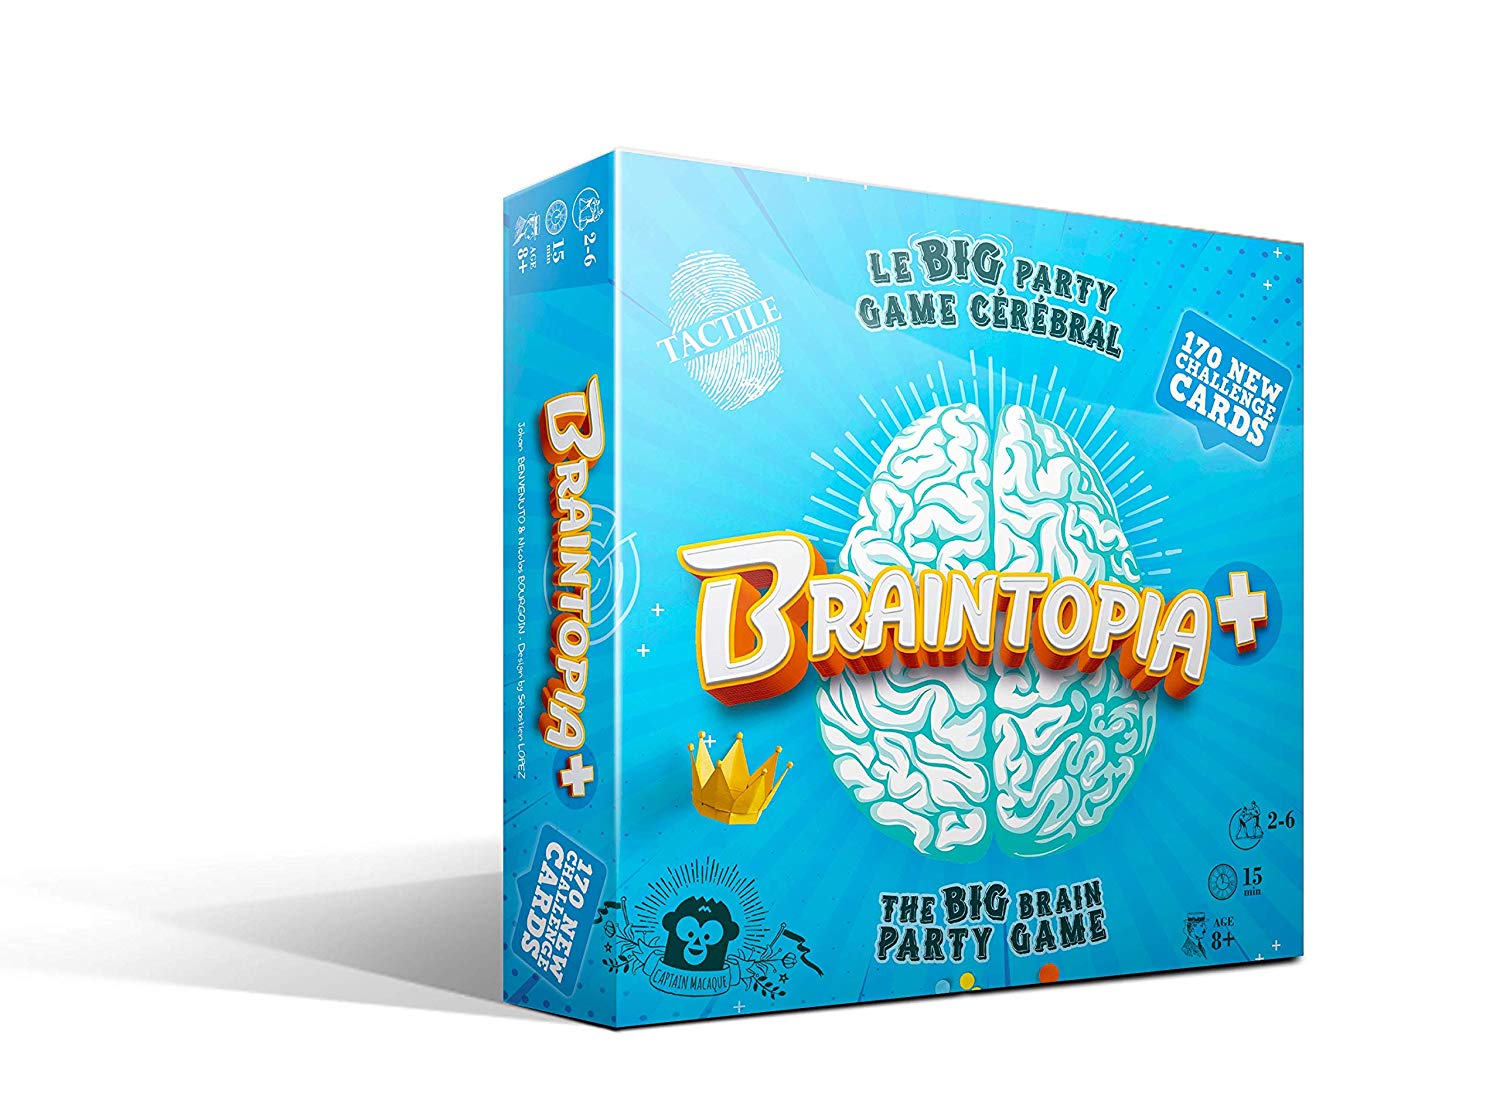 Braintopia + The Brain Party Game (Multilingual)